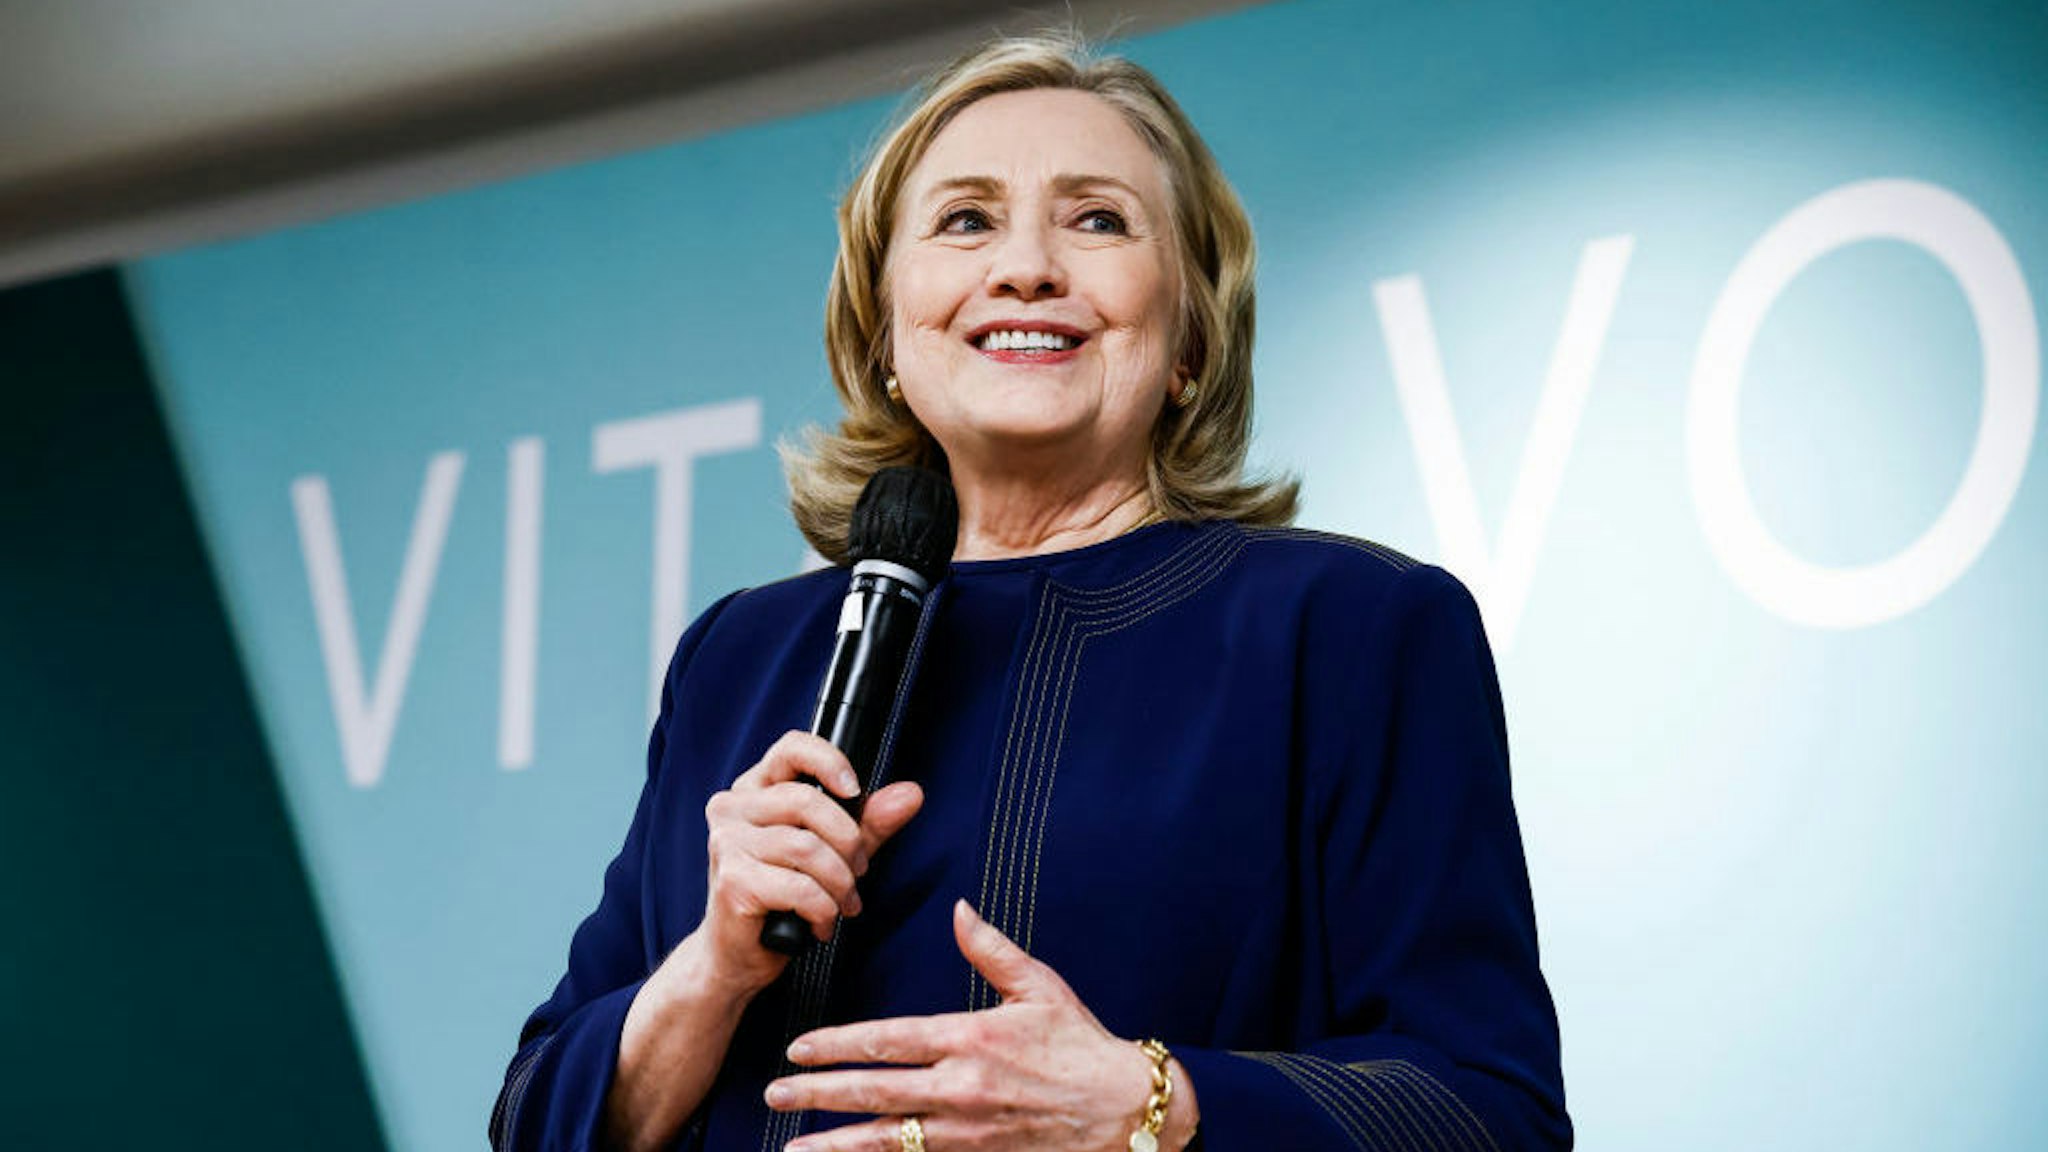 WASHINGTON, DC - MAY 05: Former Secretary of State Hillary Rodham Clinton speaks at a panel discussion during the Vital Voices Global Headquarters for Women's Leadership grand opening festival on May 05, 2022 in Washington, DC. (Photo by Paul Morigi/Getty Images)